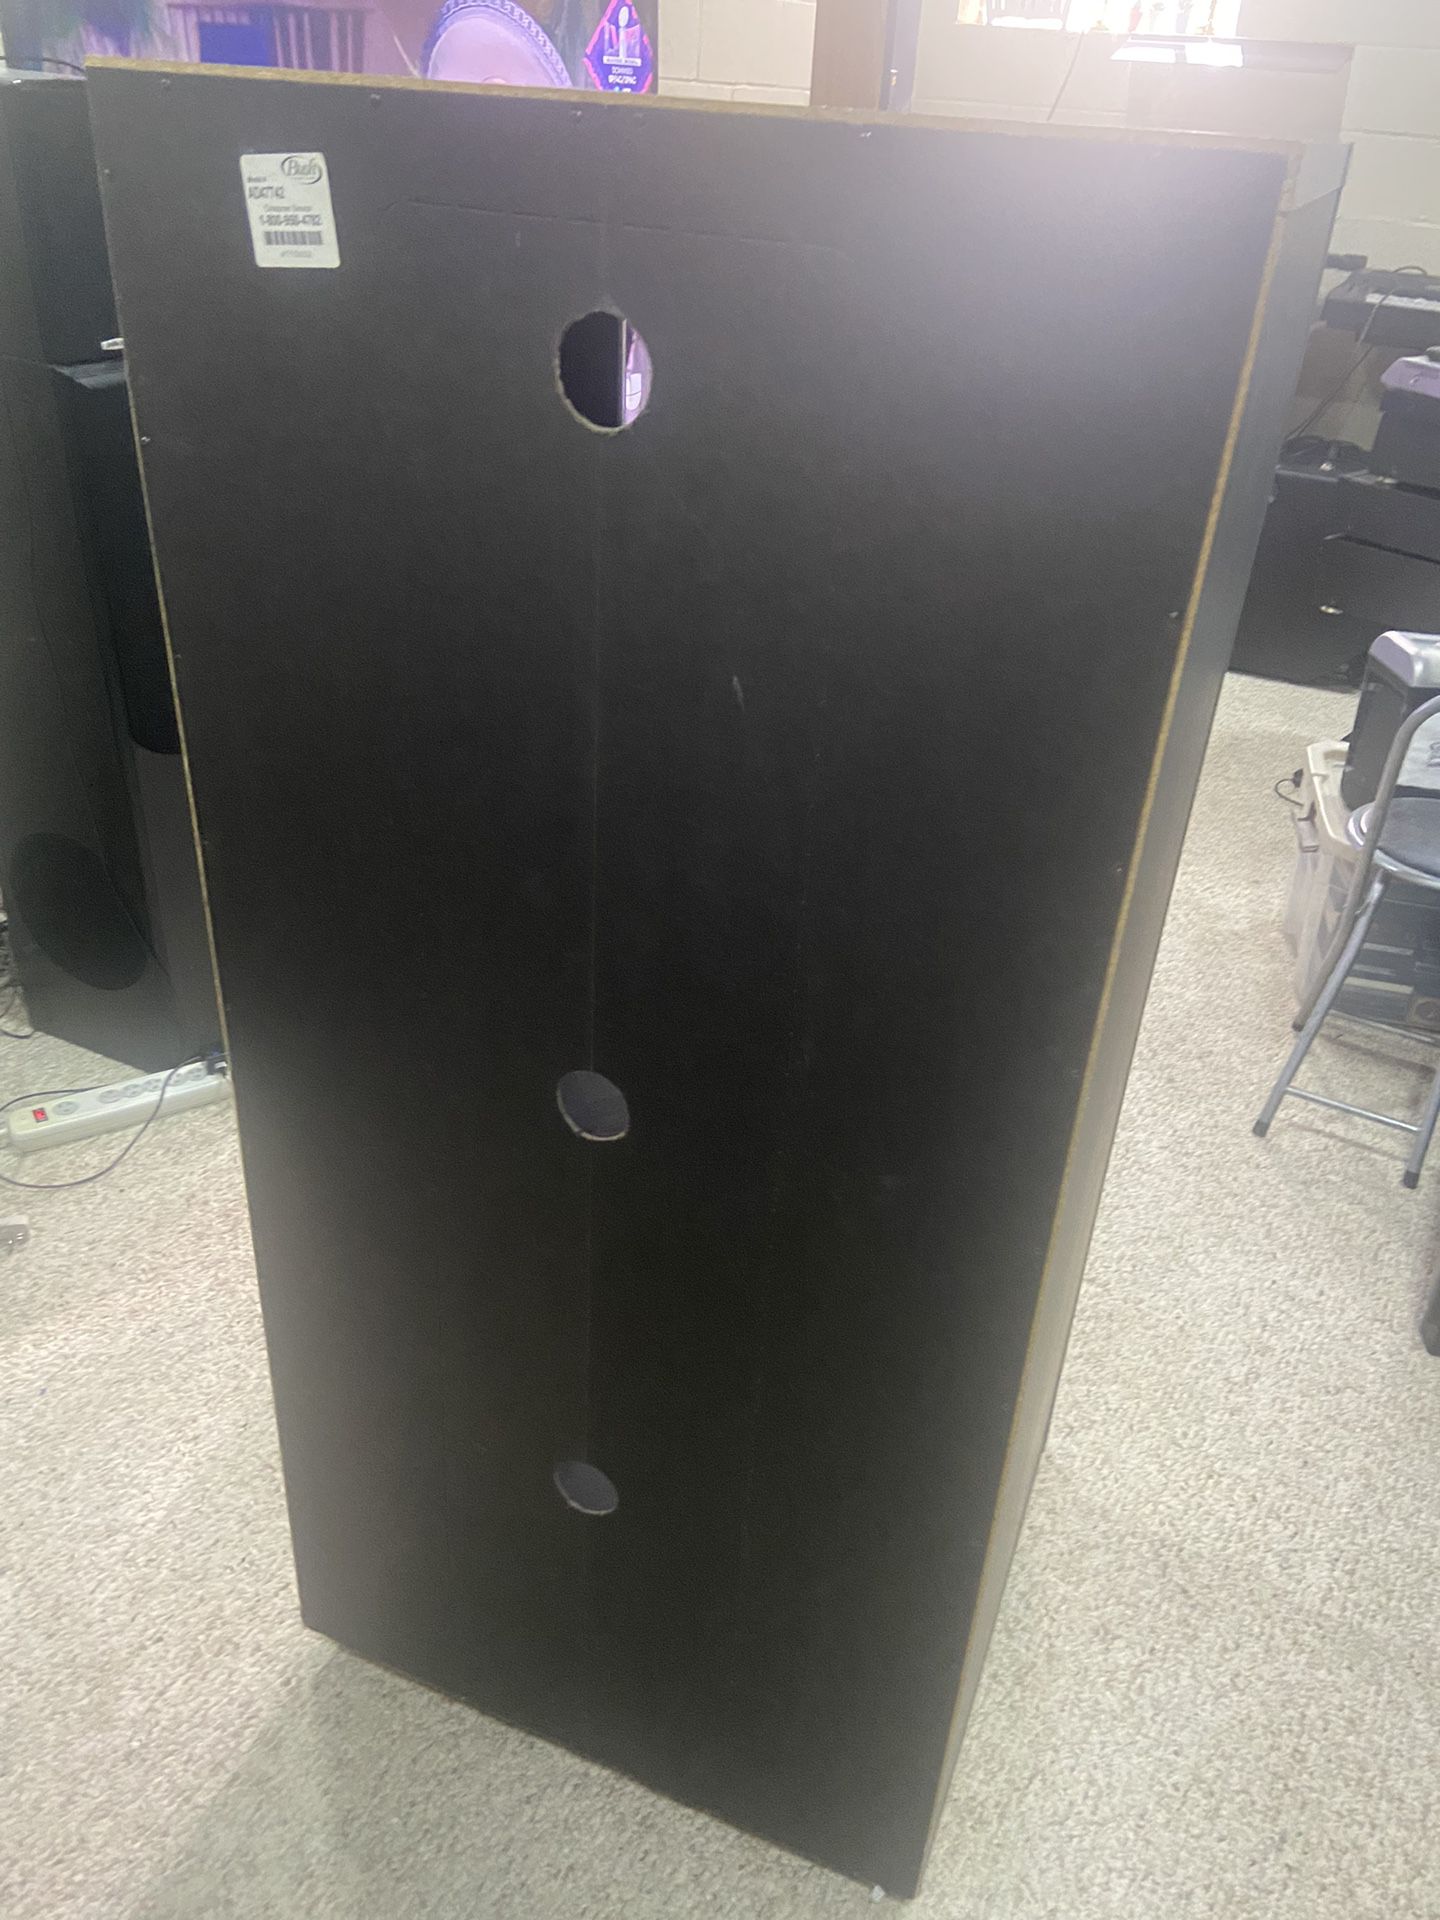 Stereo Cabinet $20